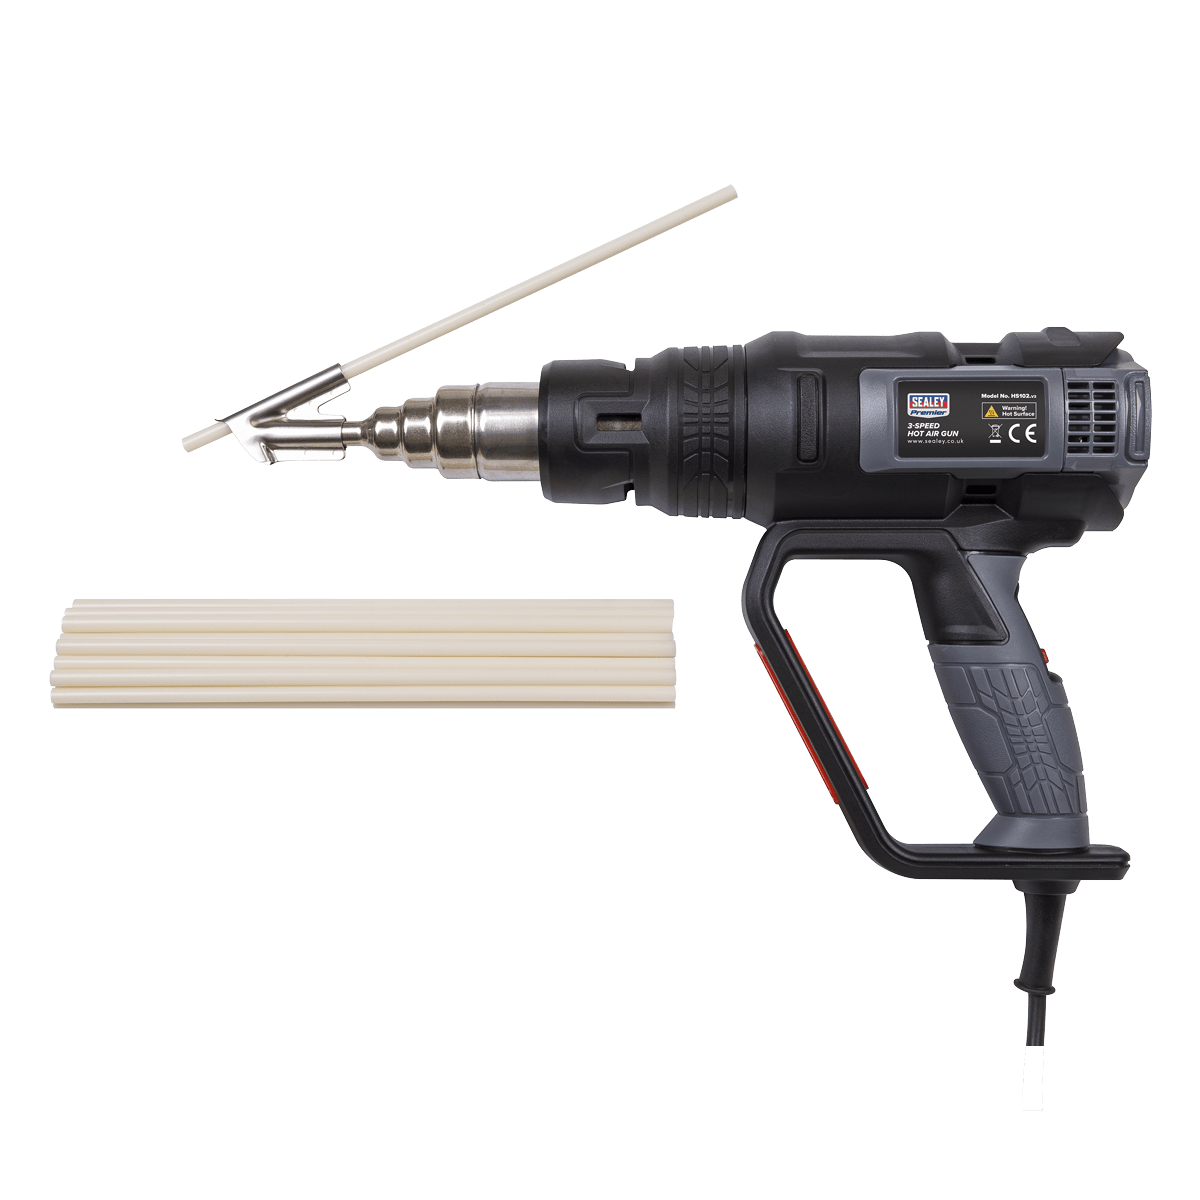 Plastic Welding Kit including HS102 Hot Air Gun | Hot air gun kit supplied with two plastic welding nozzles, a starter pack of ABS welding rods and a concise instruction manual. | toolforce.ie